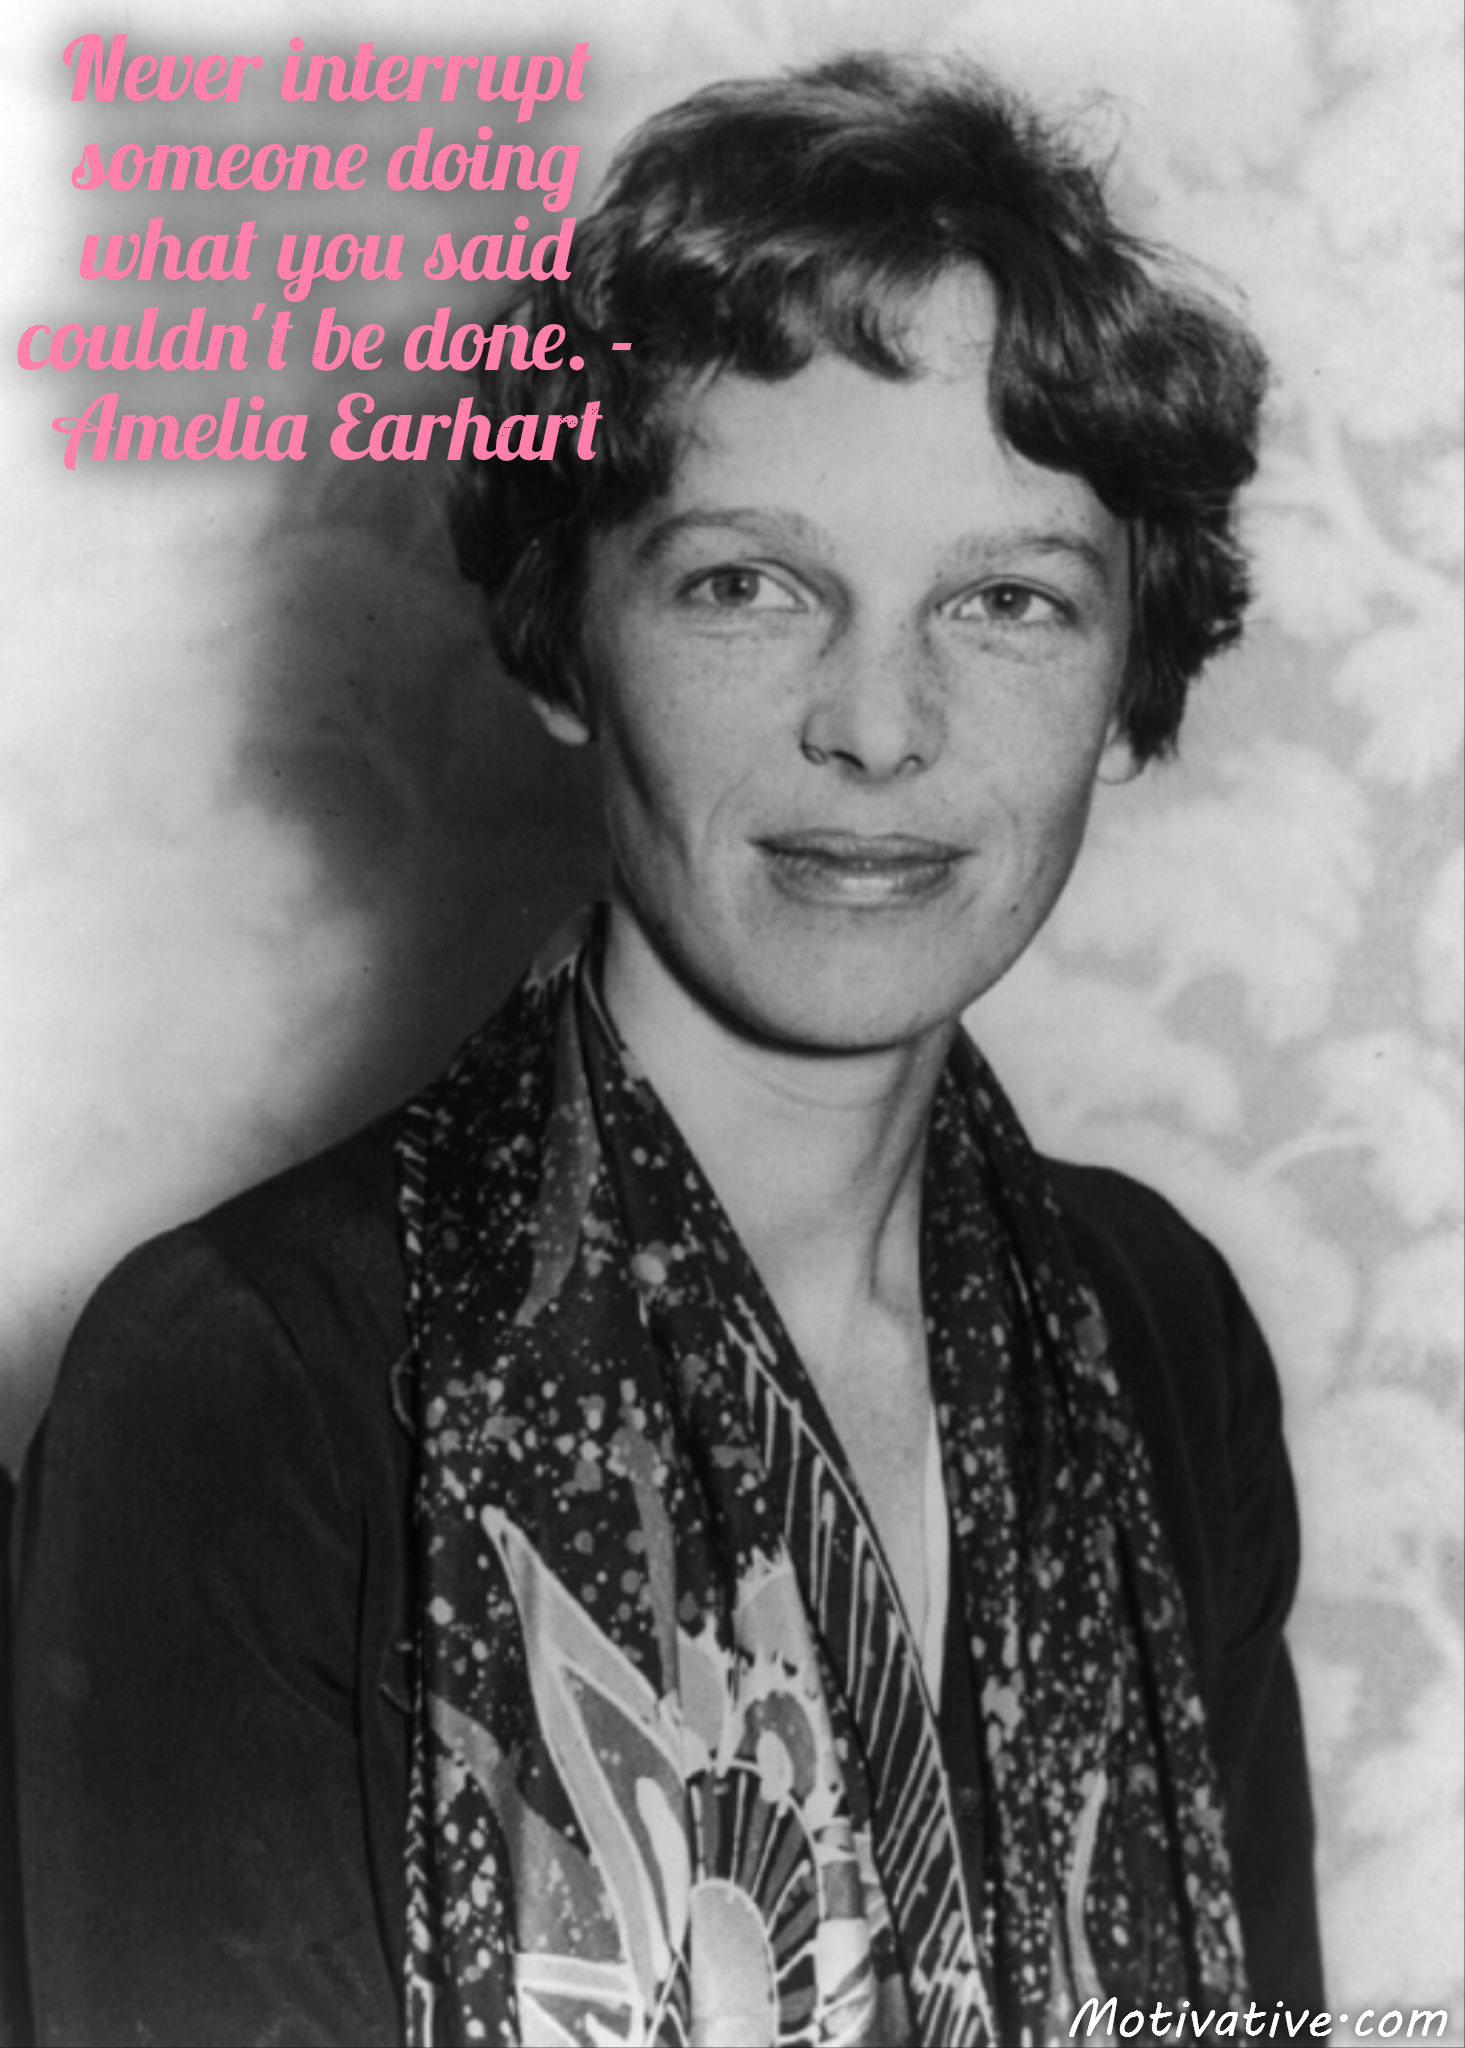 Never interrupt someone doing what you said couldn’t be done. – Amelia Earhart